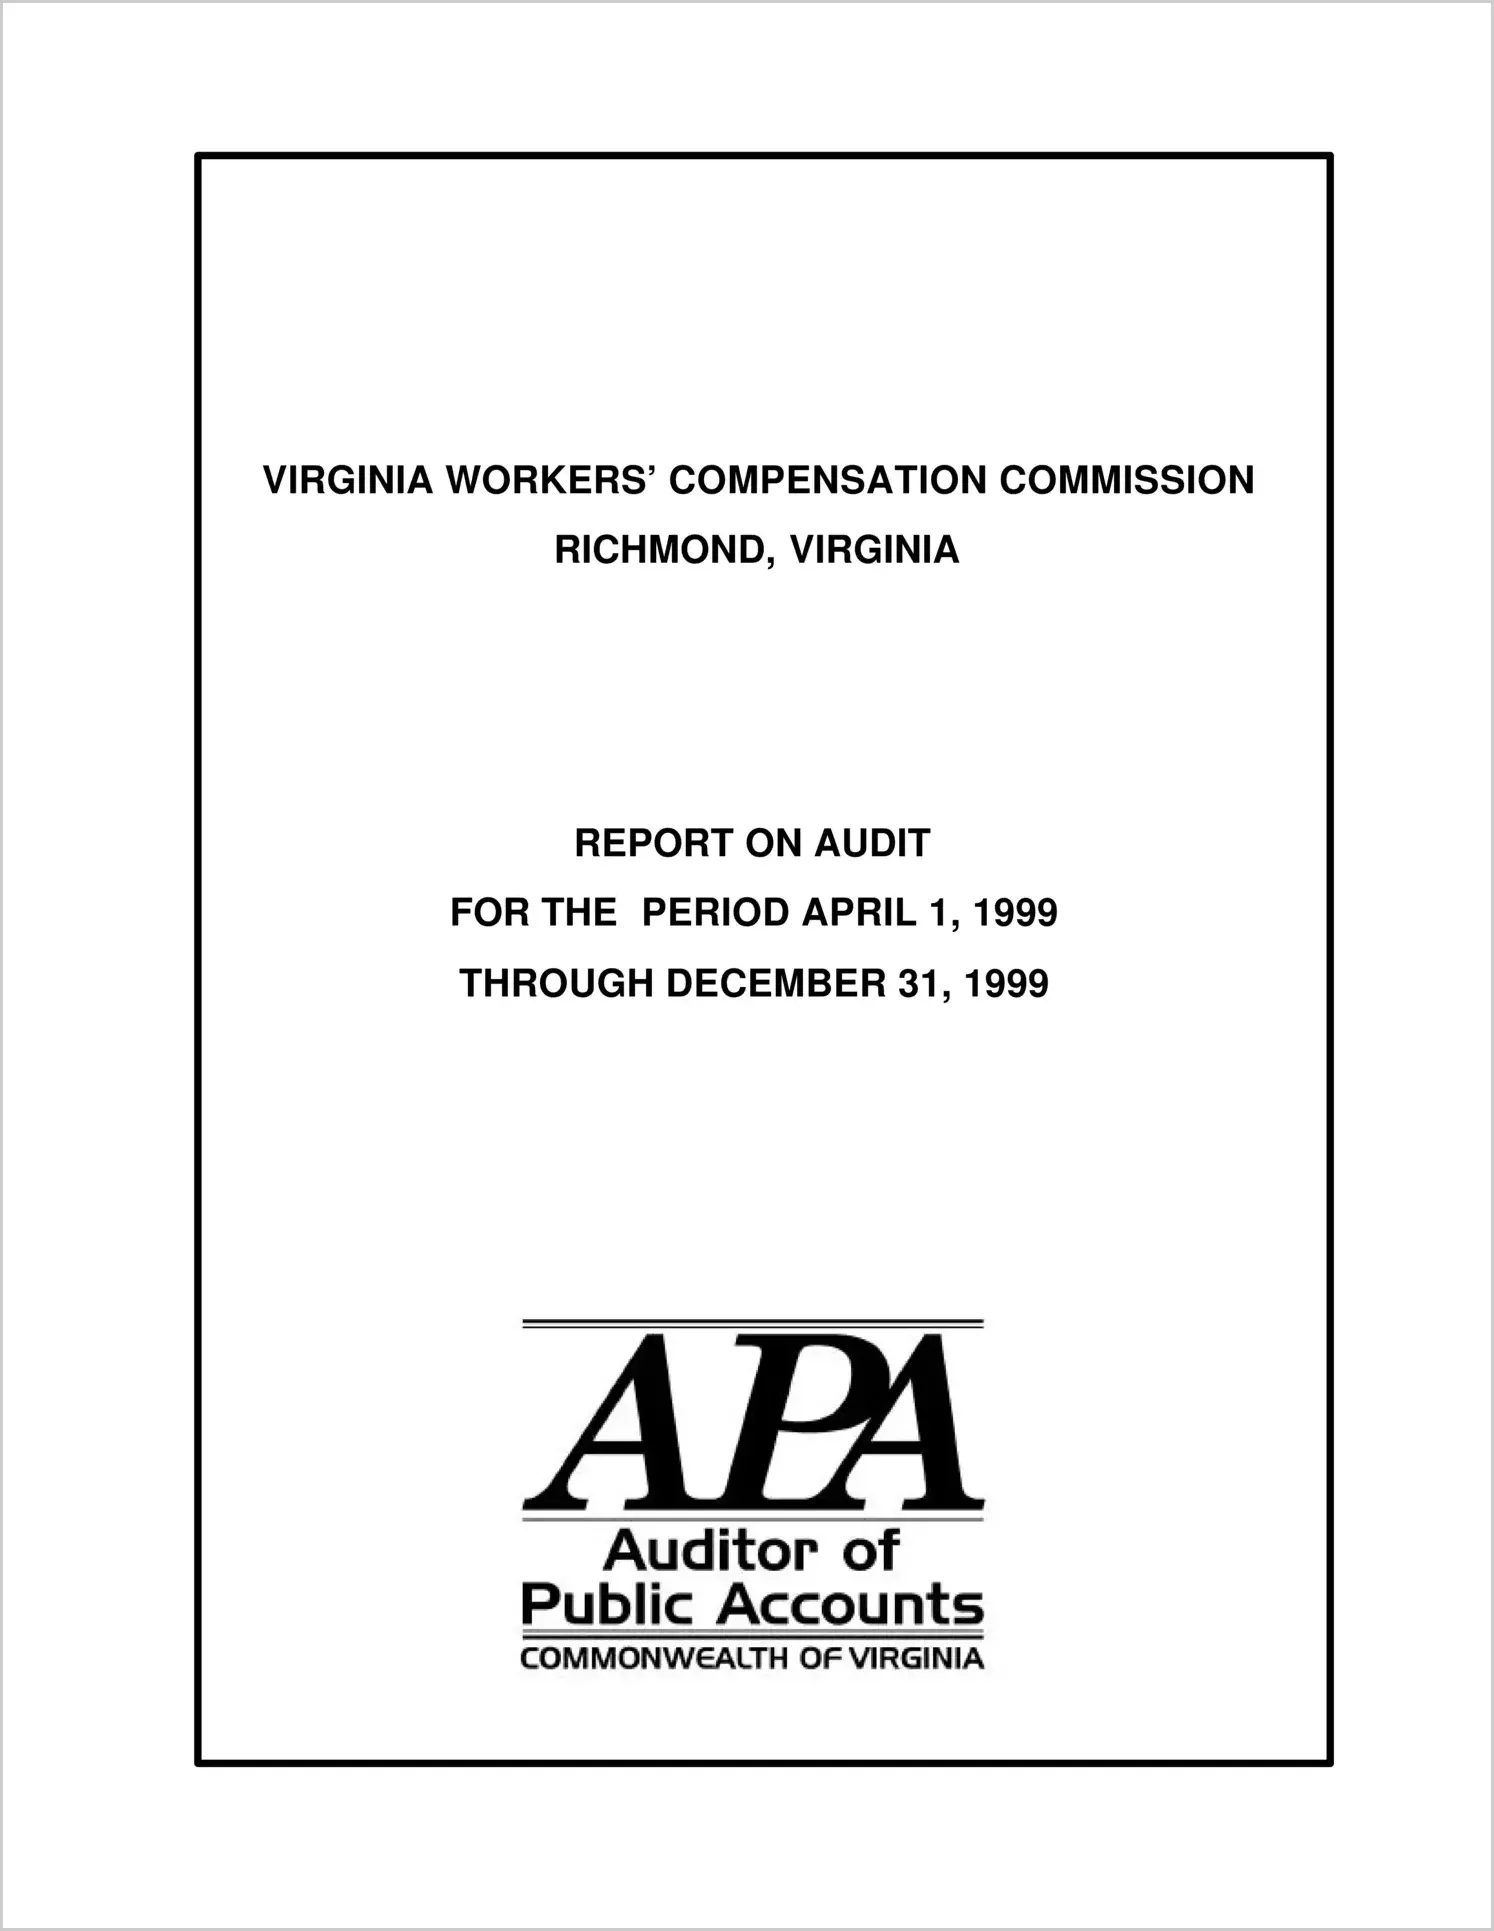 Virginia WorkersOCompensation Commission for period April 1, 1999 through December 31, 1999